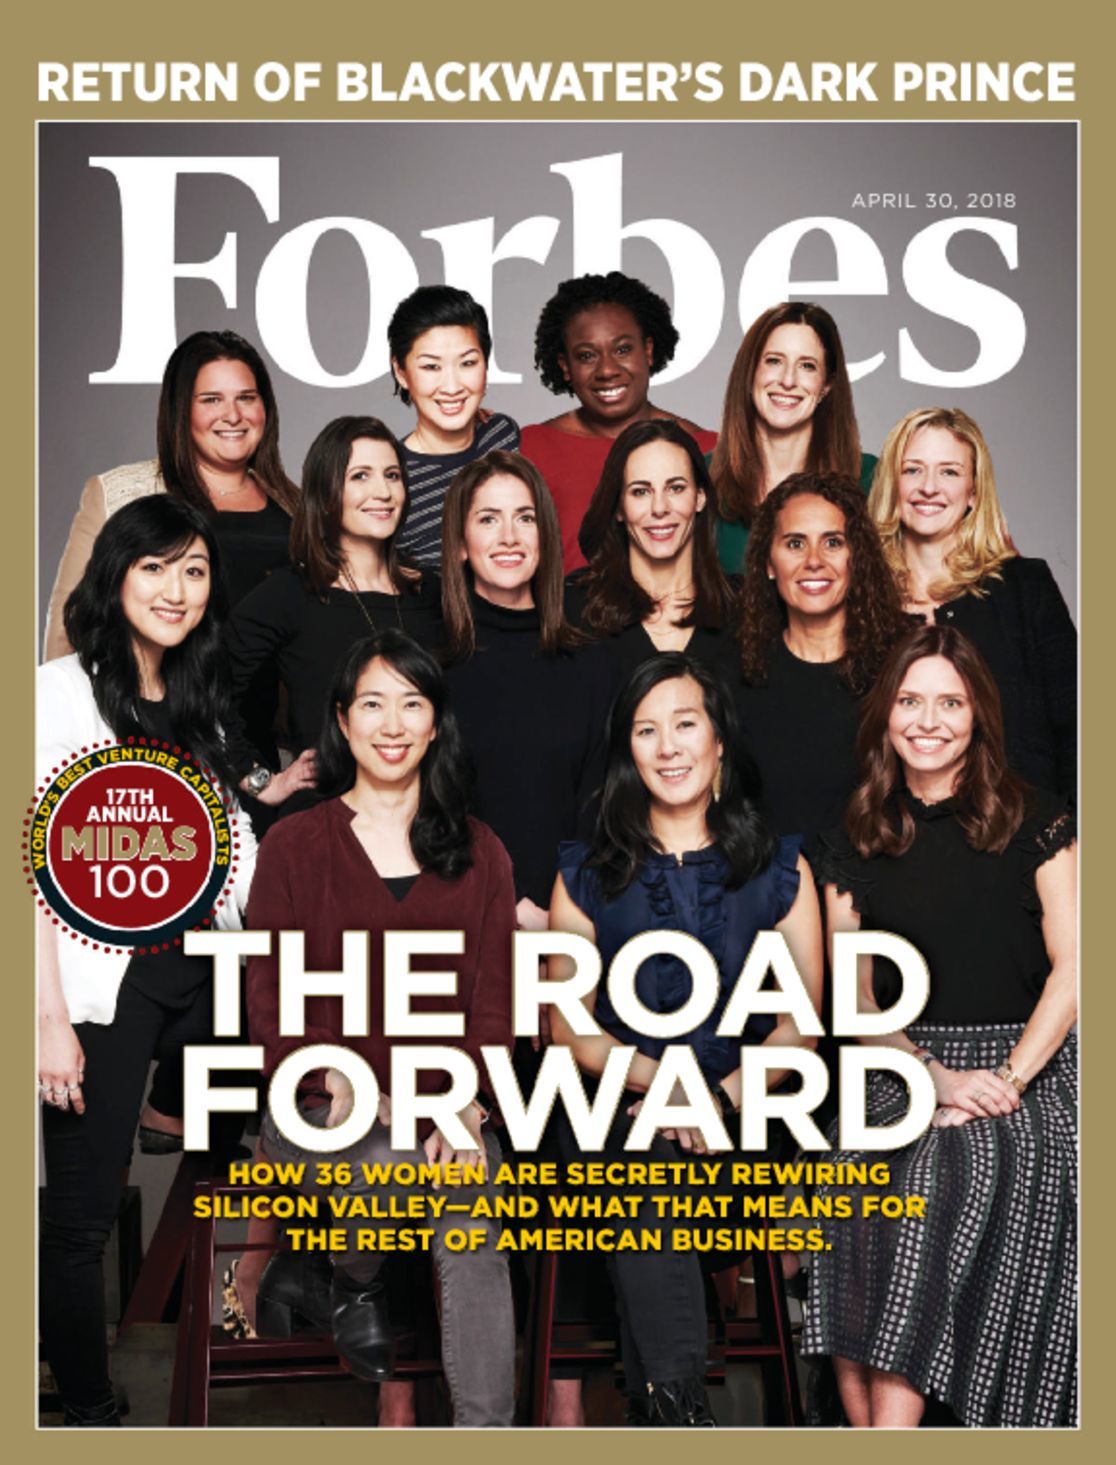 forbes-magazine-today-s-business-leaders-discountmags